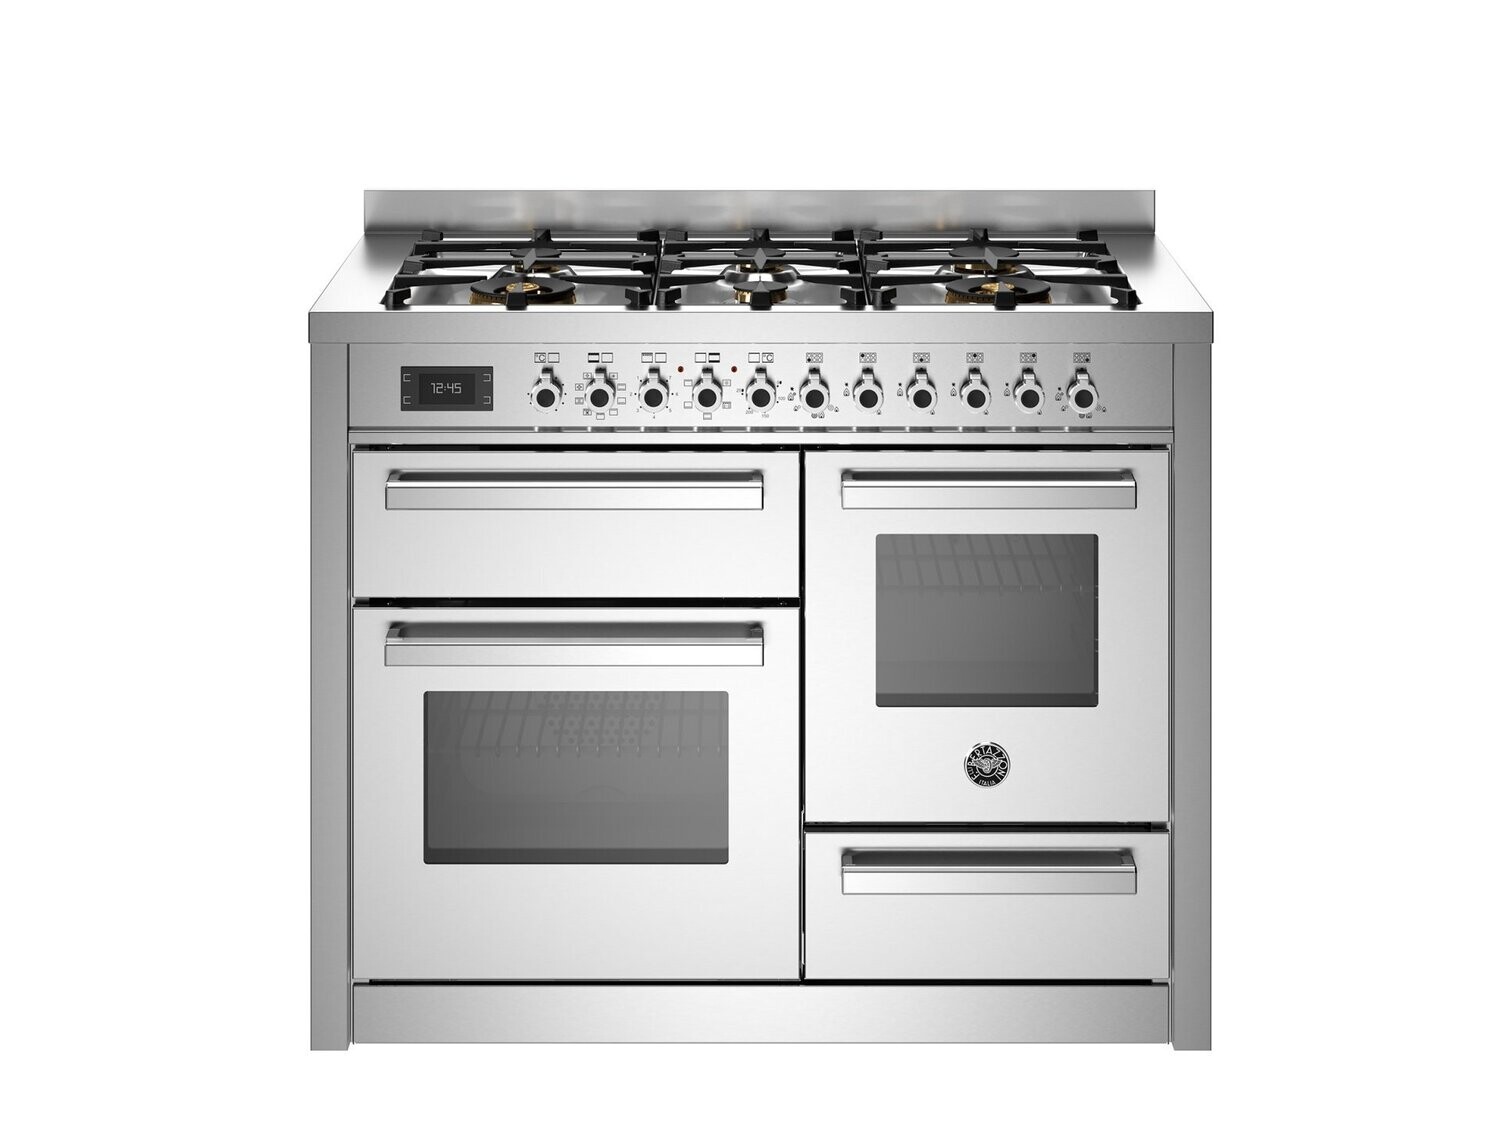 Bertazzoni 110cm Professional Series 6 Burner Electric Triple Oven, Colour: Stainless Steel